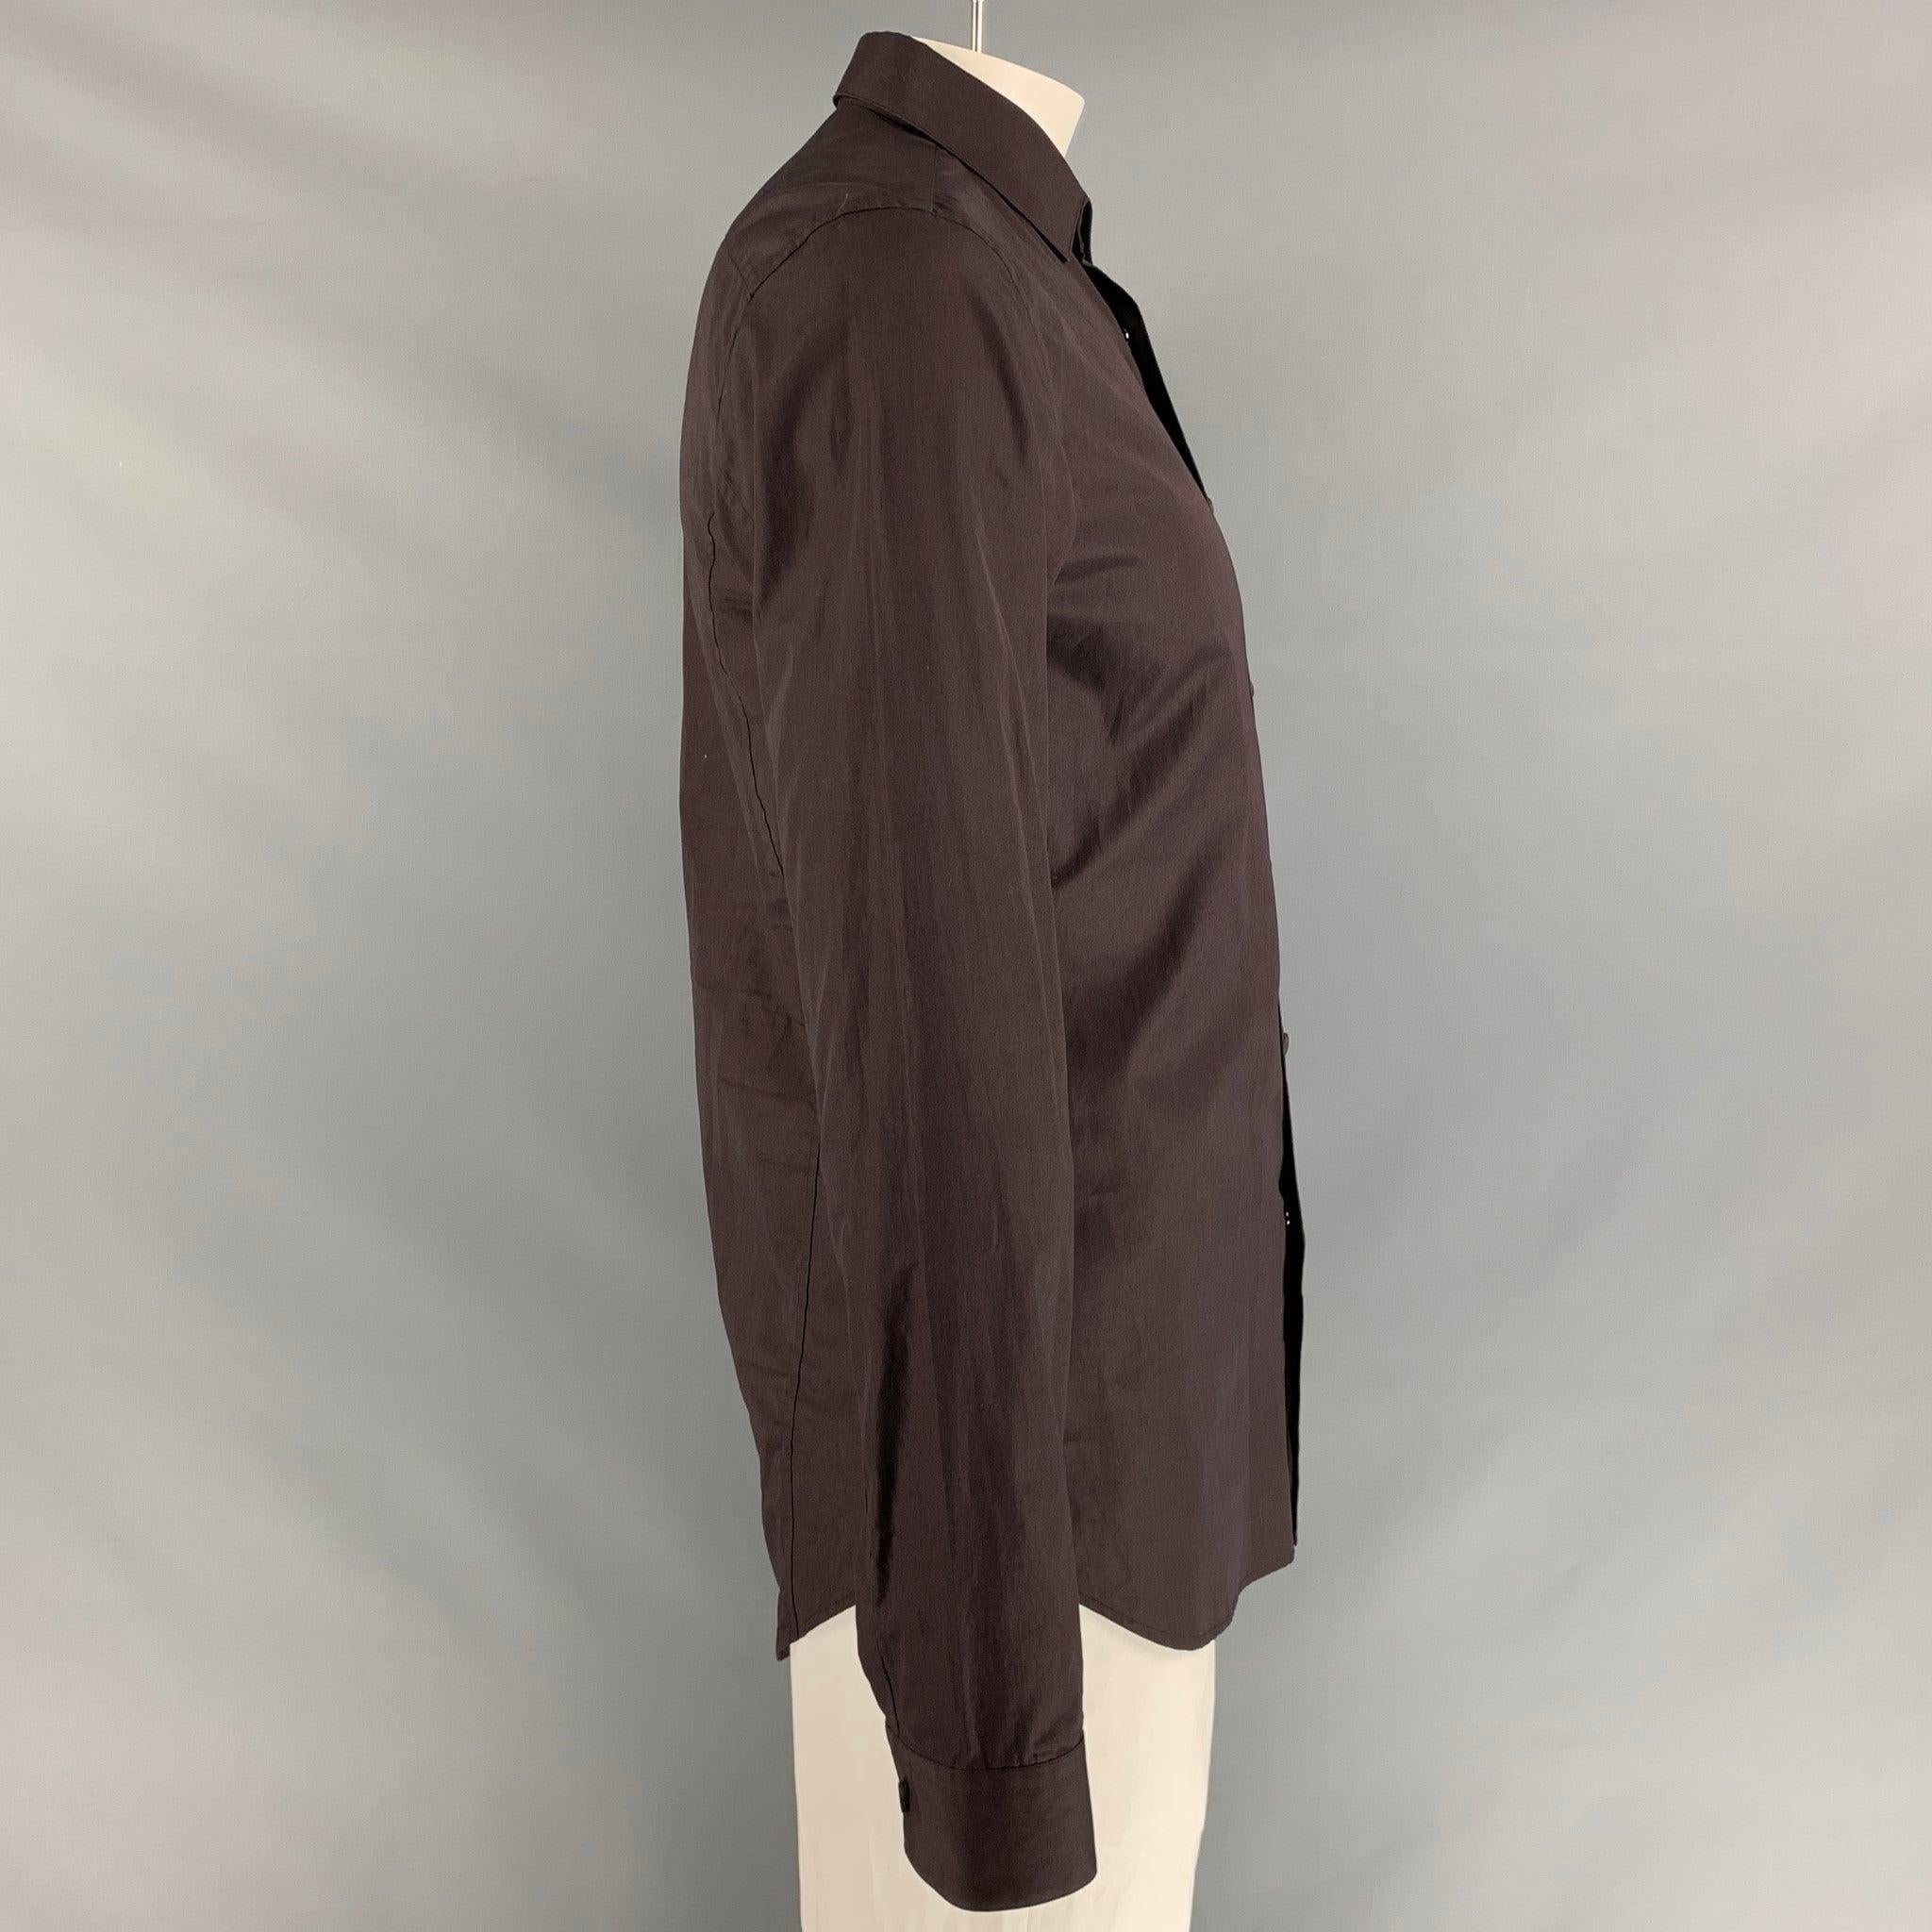 CALVIN KLEIN COLLECTION 
long sleeve shirt comes in solid brown cotton features snap button front, spread collar and one button square cuff. Made in Italy.Excellent Pre-Owned Condition. 

Marked:   L 

Measurements: 
 
Shoulder: 18 inChest: 42